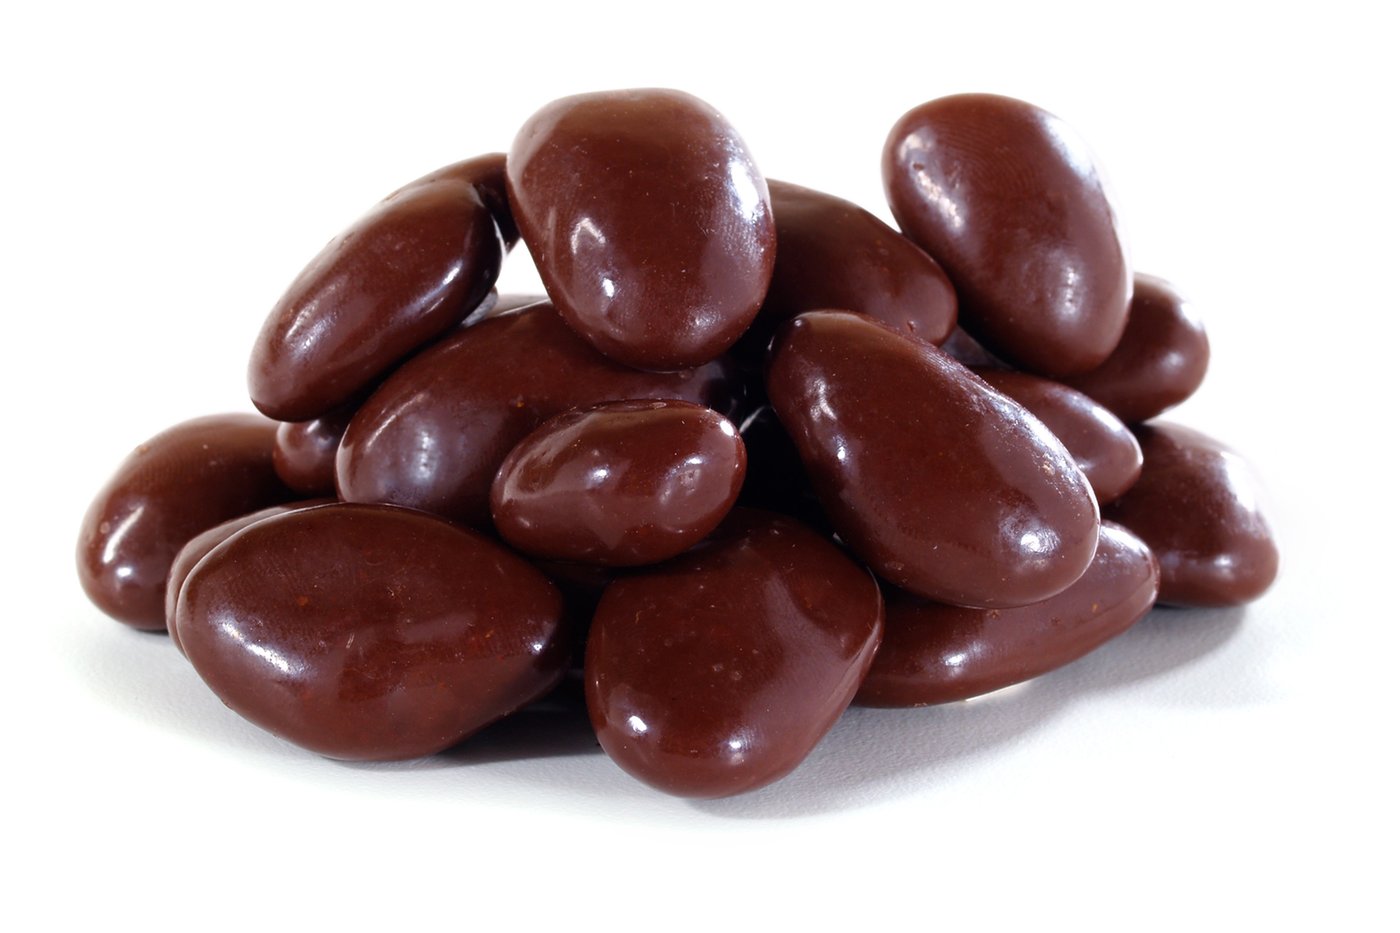 Chocolate Covered Pecans image zoom